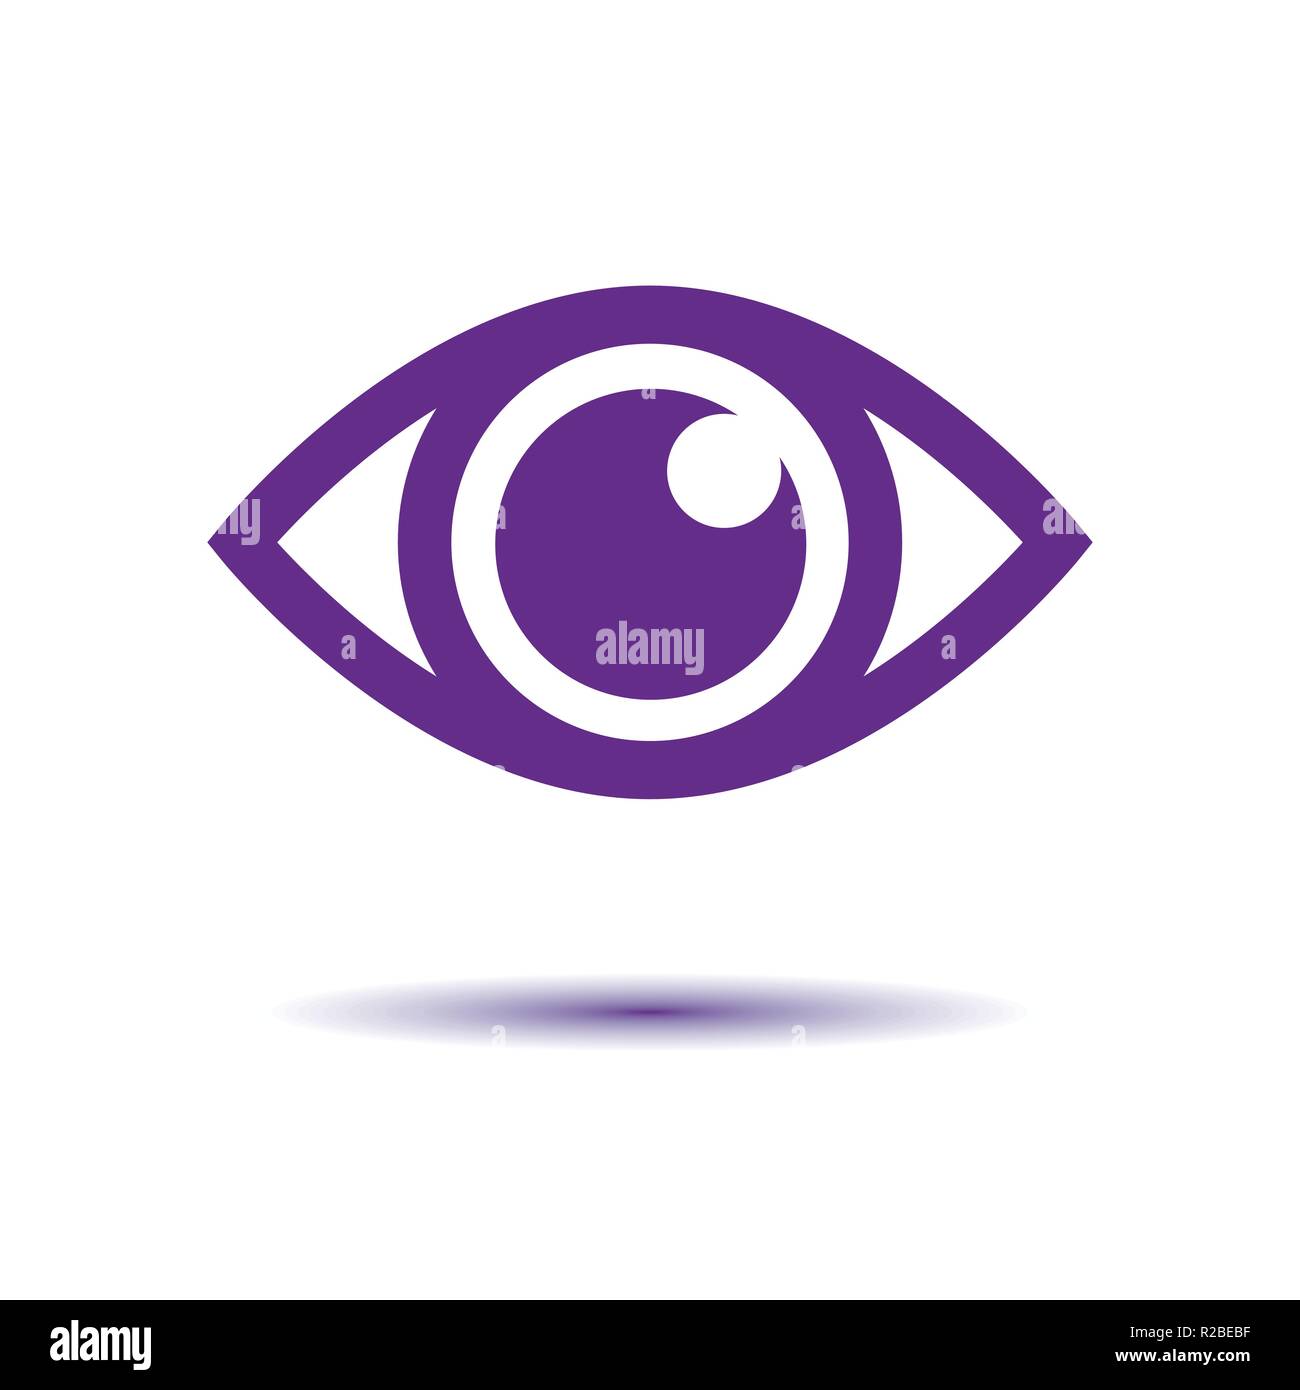 Simple eye icon vector. Round flare. Medicine symbol isolated. Safety and search concept. Laconic graphic design element. Eyesight pictogram. Isolated Stock Vector